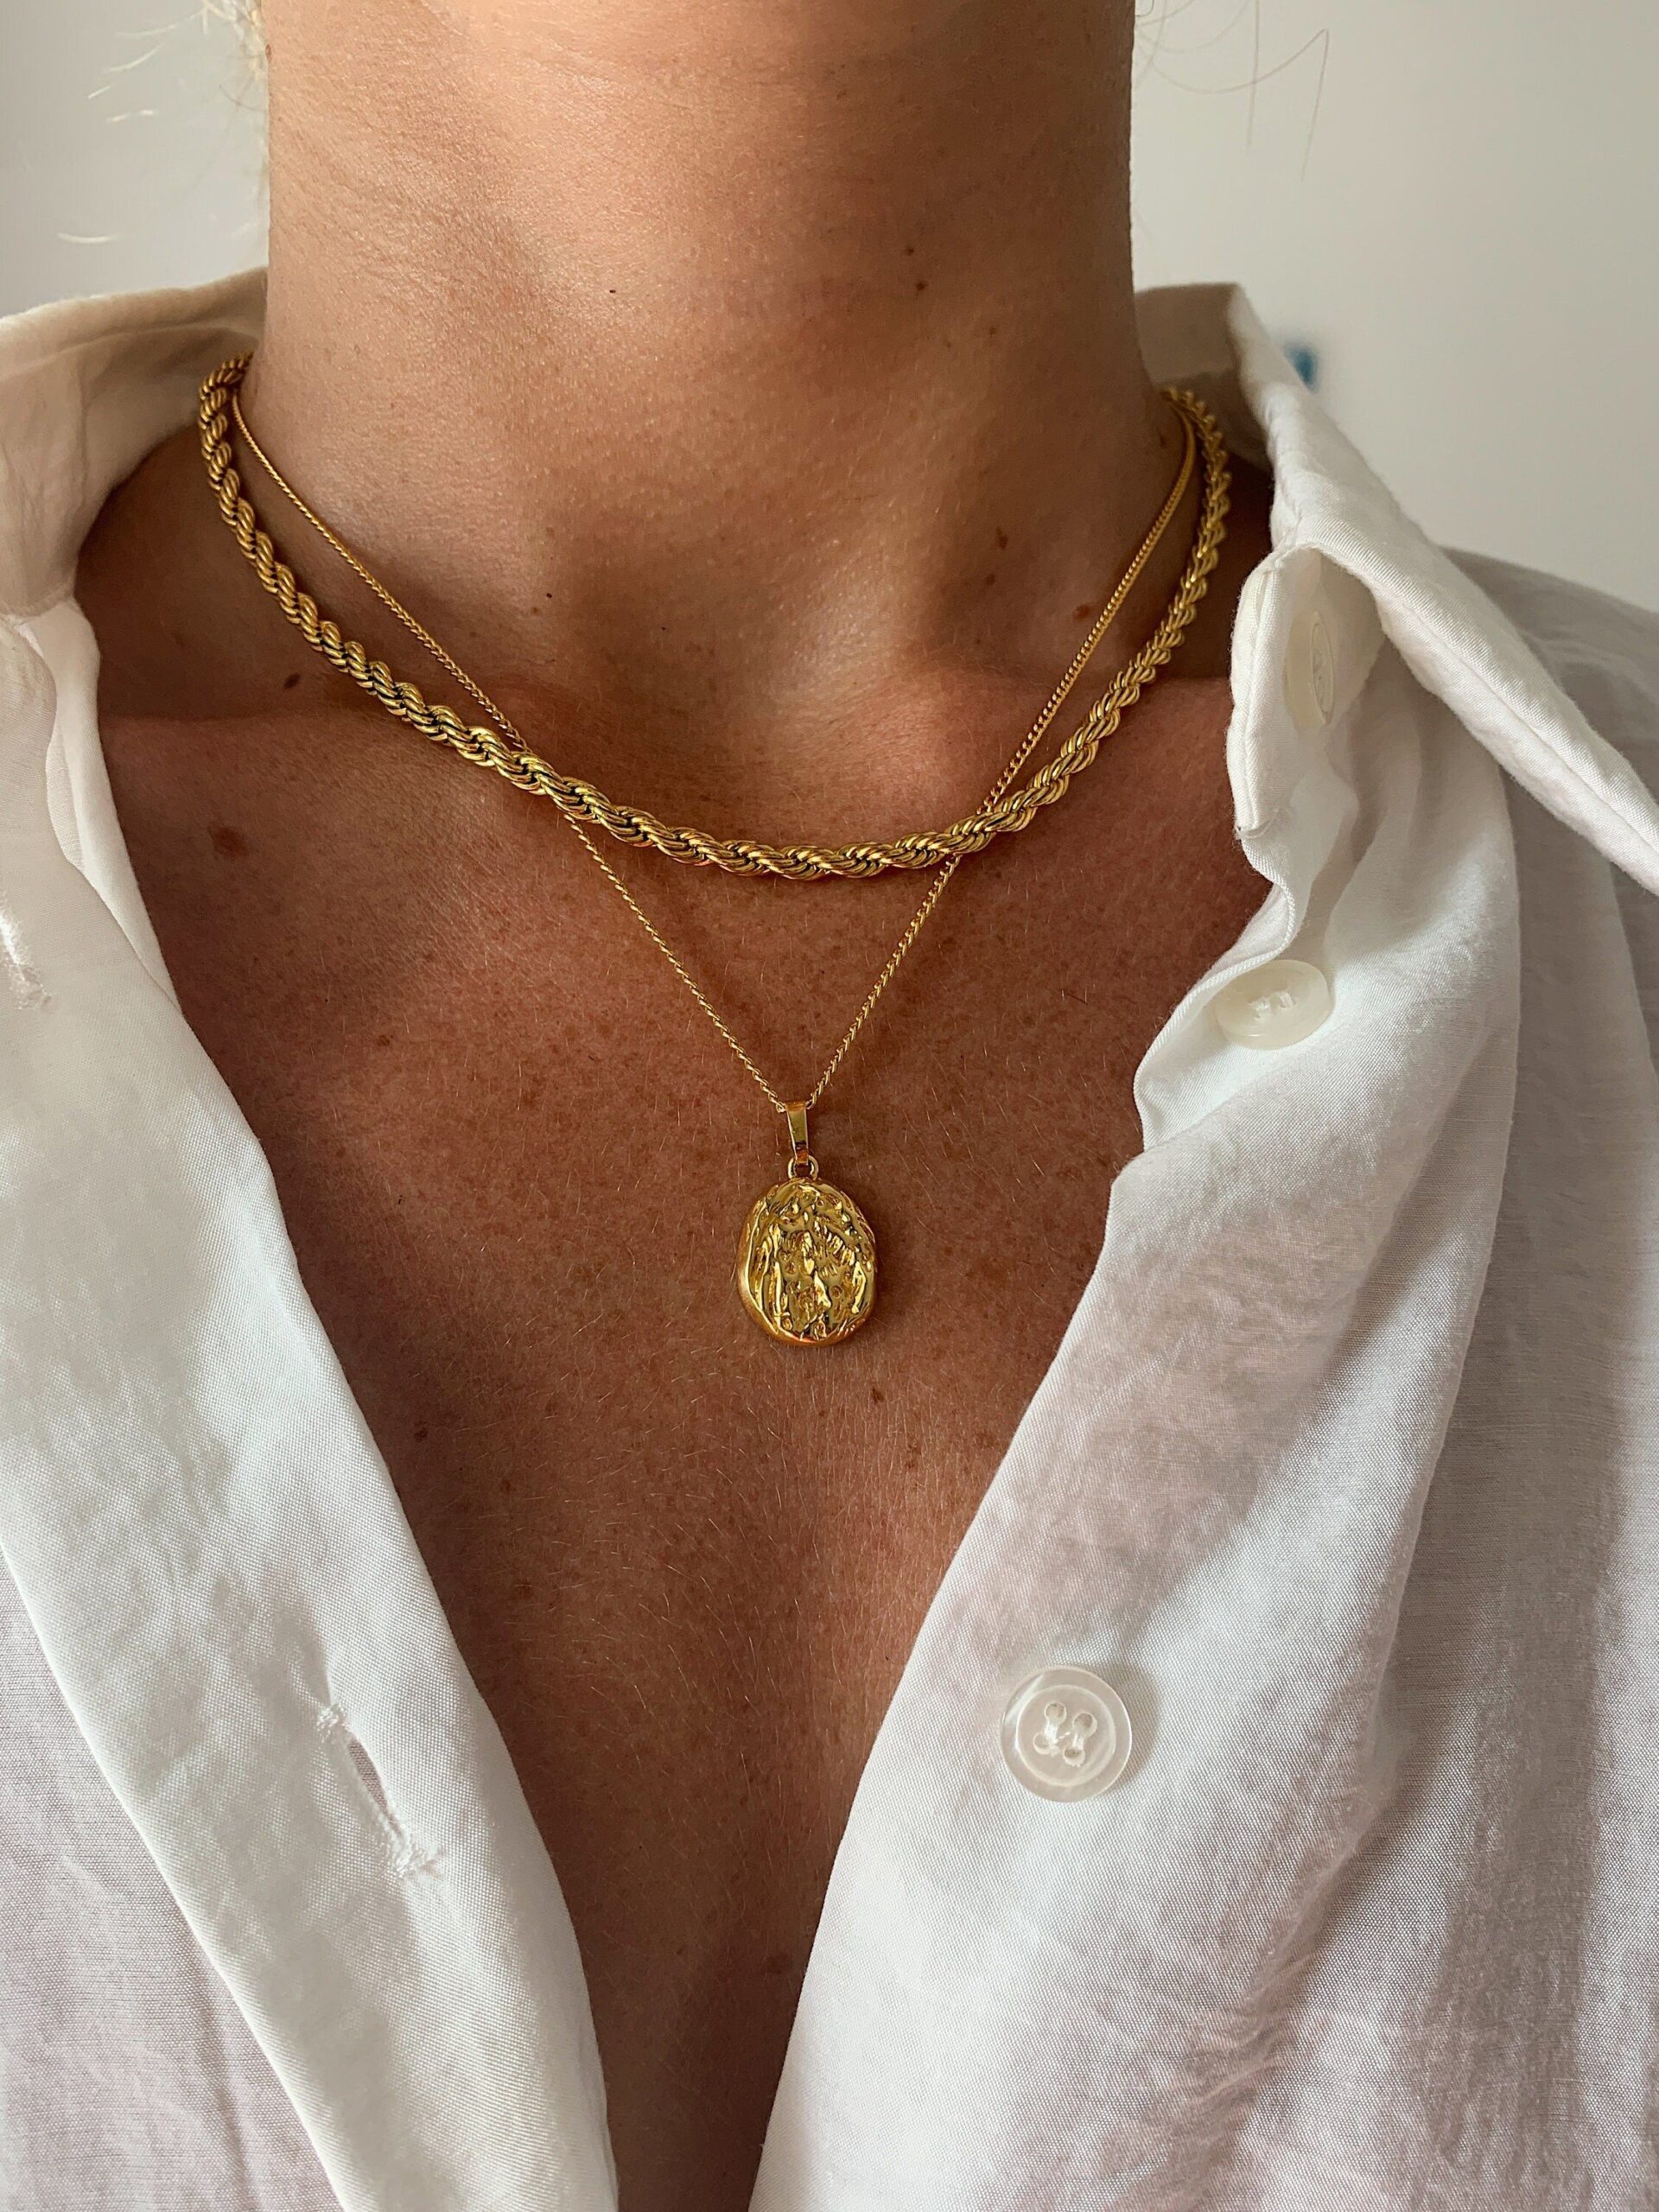 Add elegant gold pendant to your style